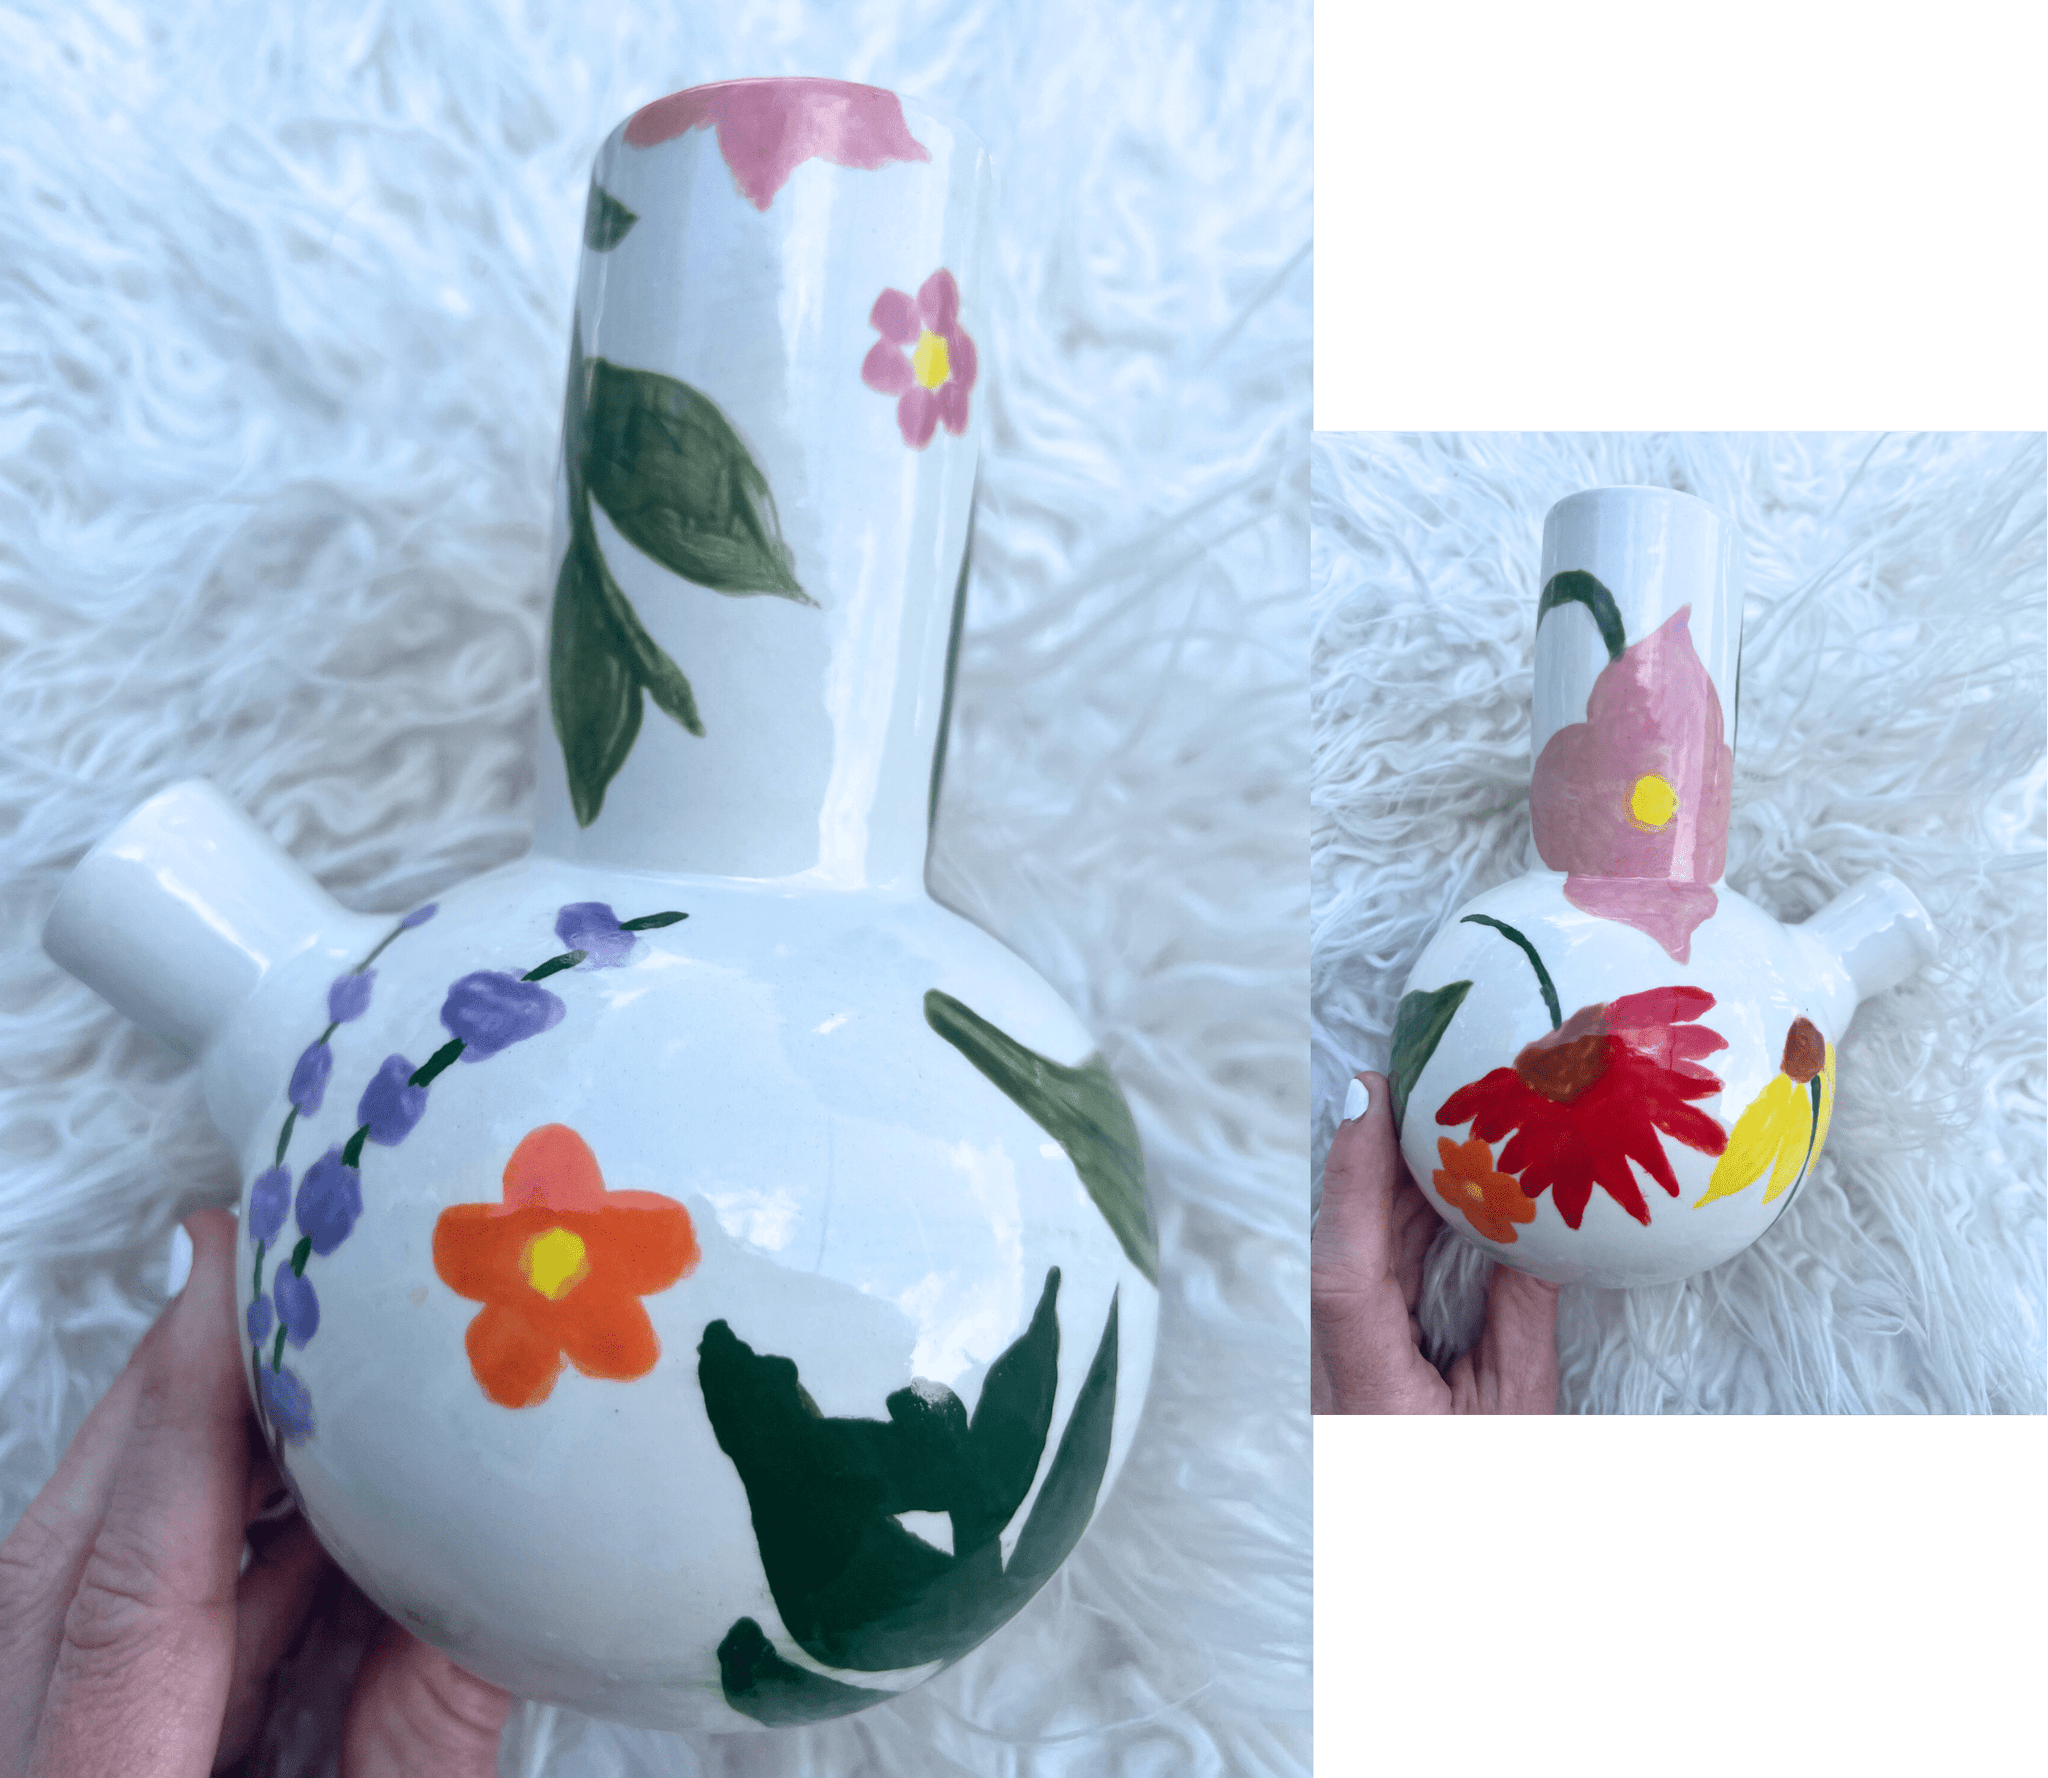 Painting pottery or porcelain